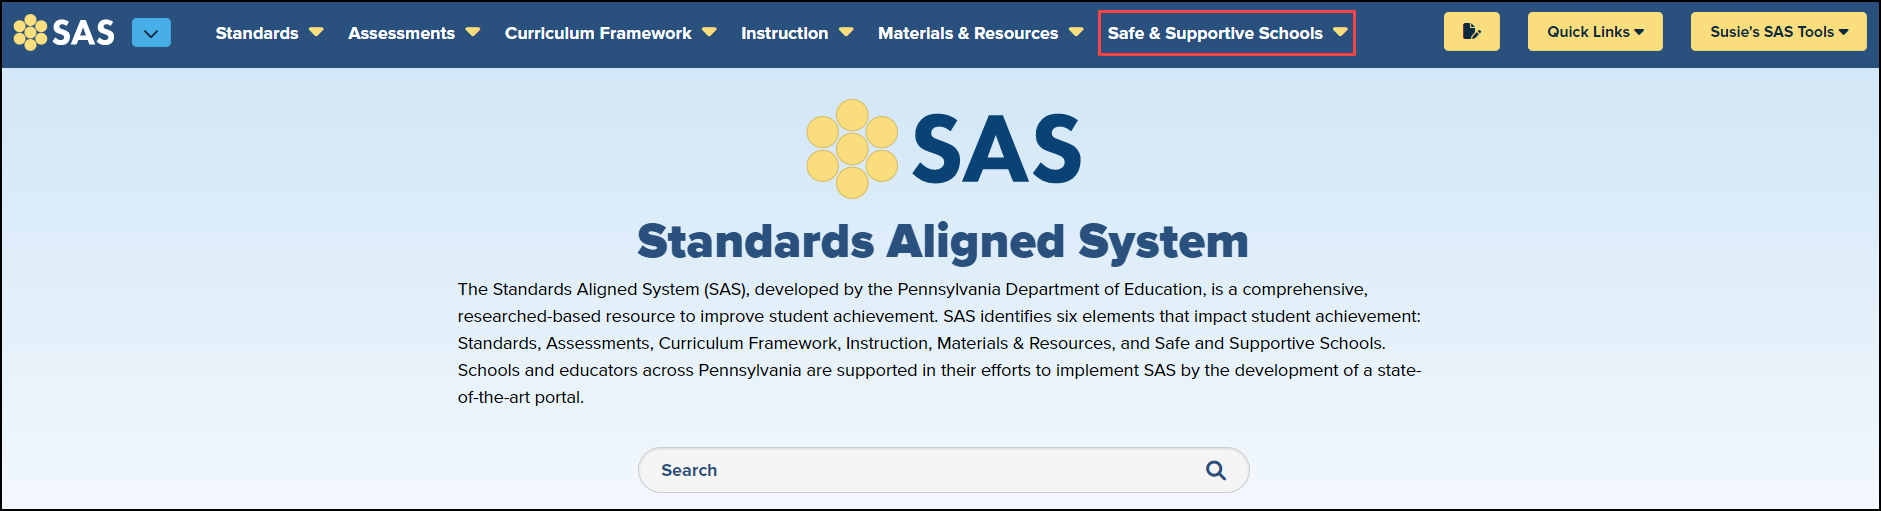 SAS homepage with safe and supportive schools menu button highlighted 